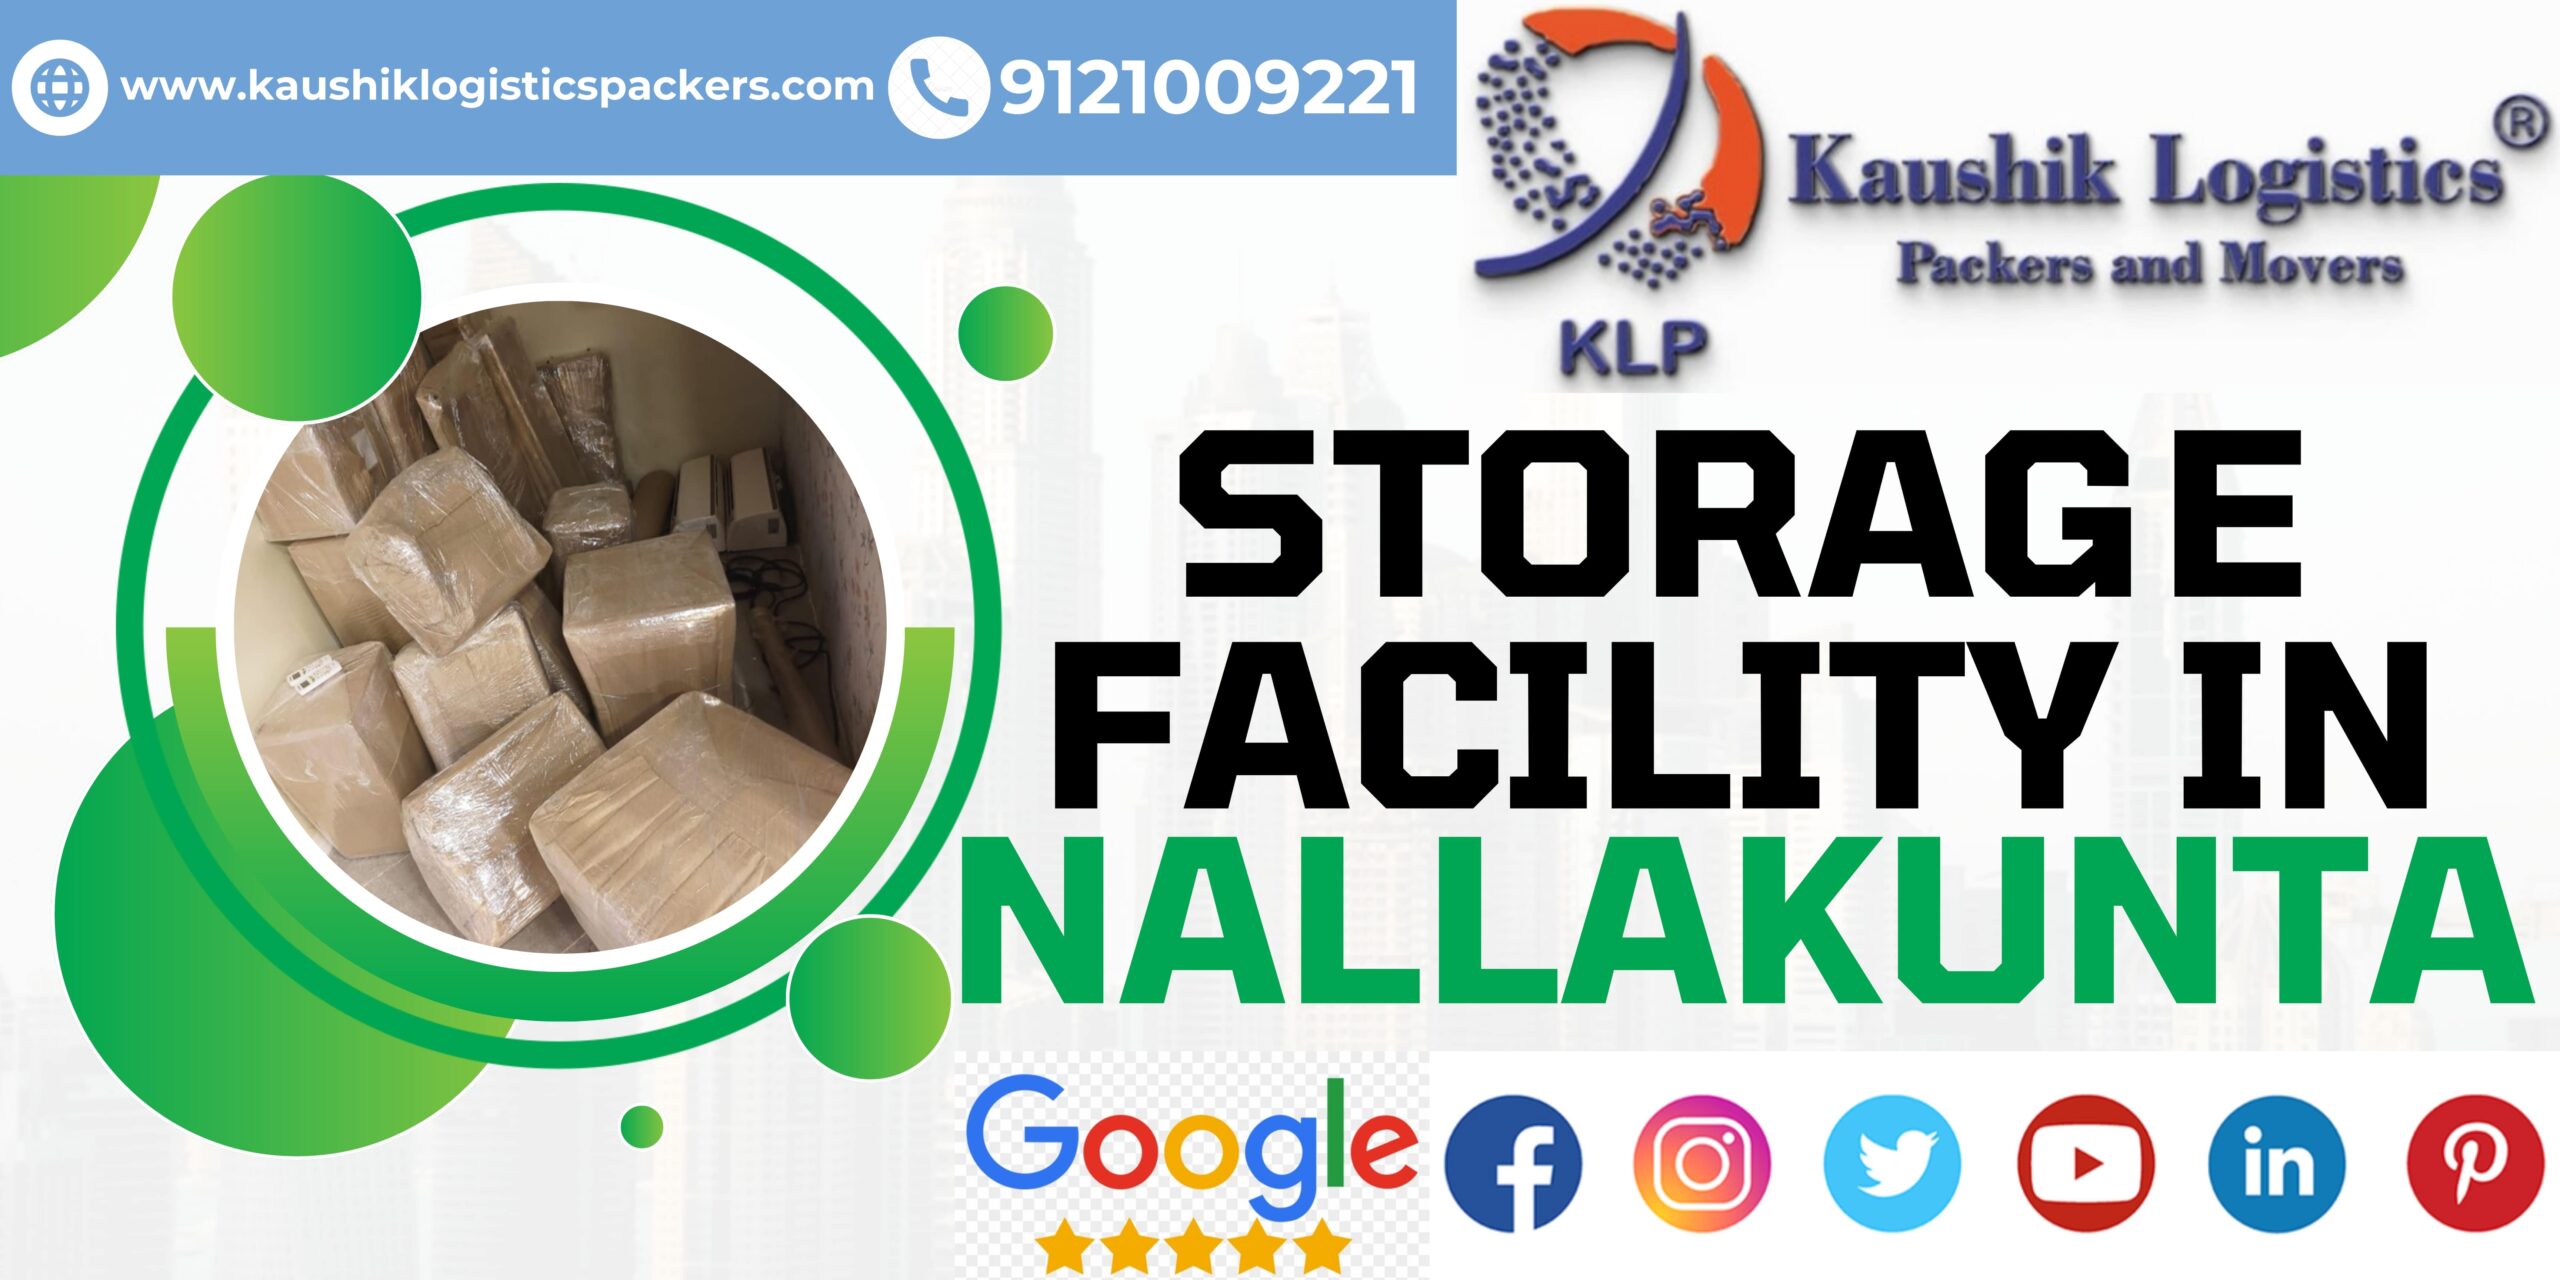 Packers and Movers In Nallakunta